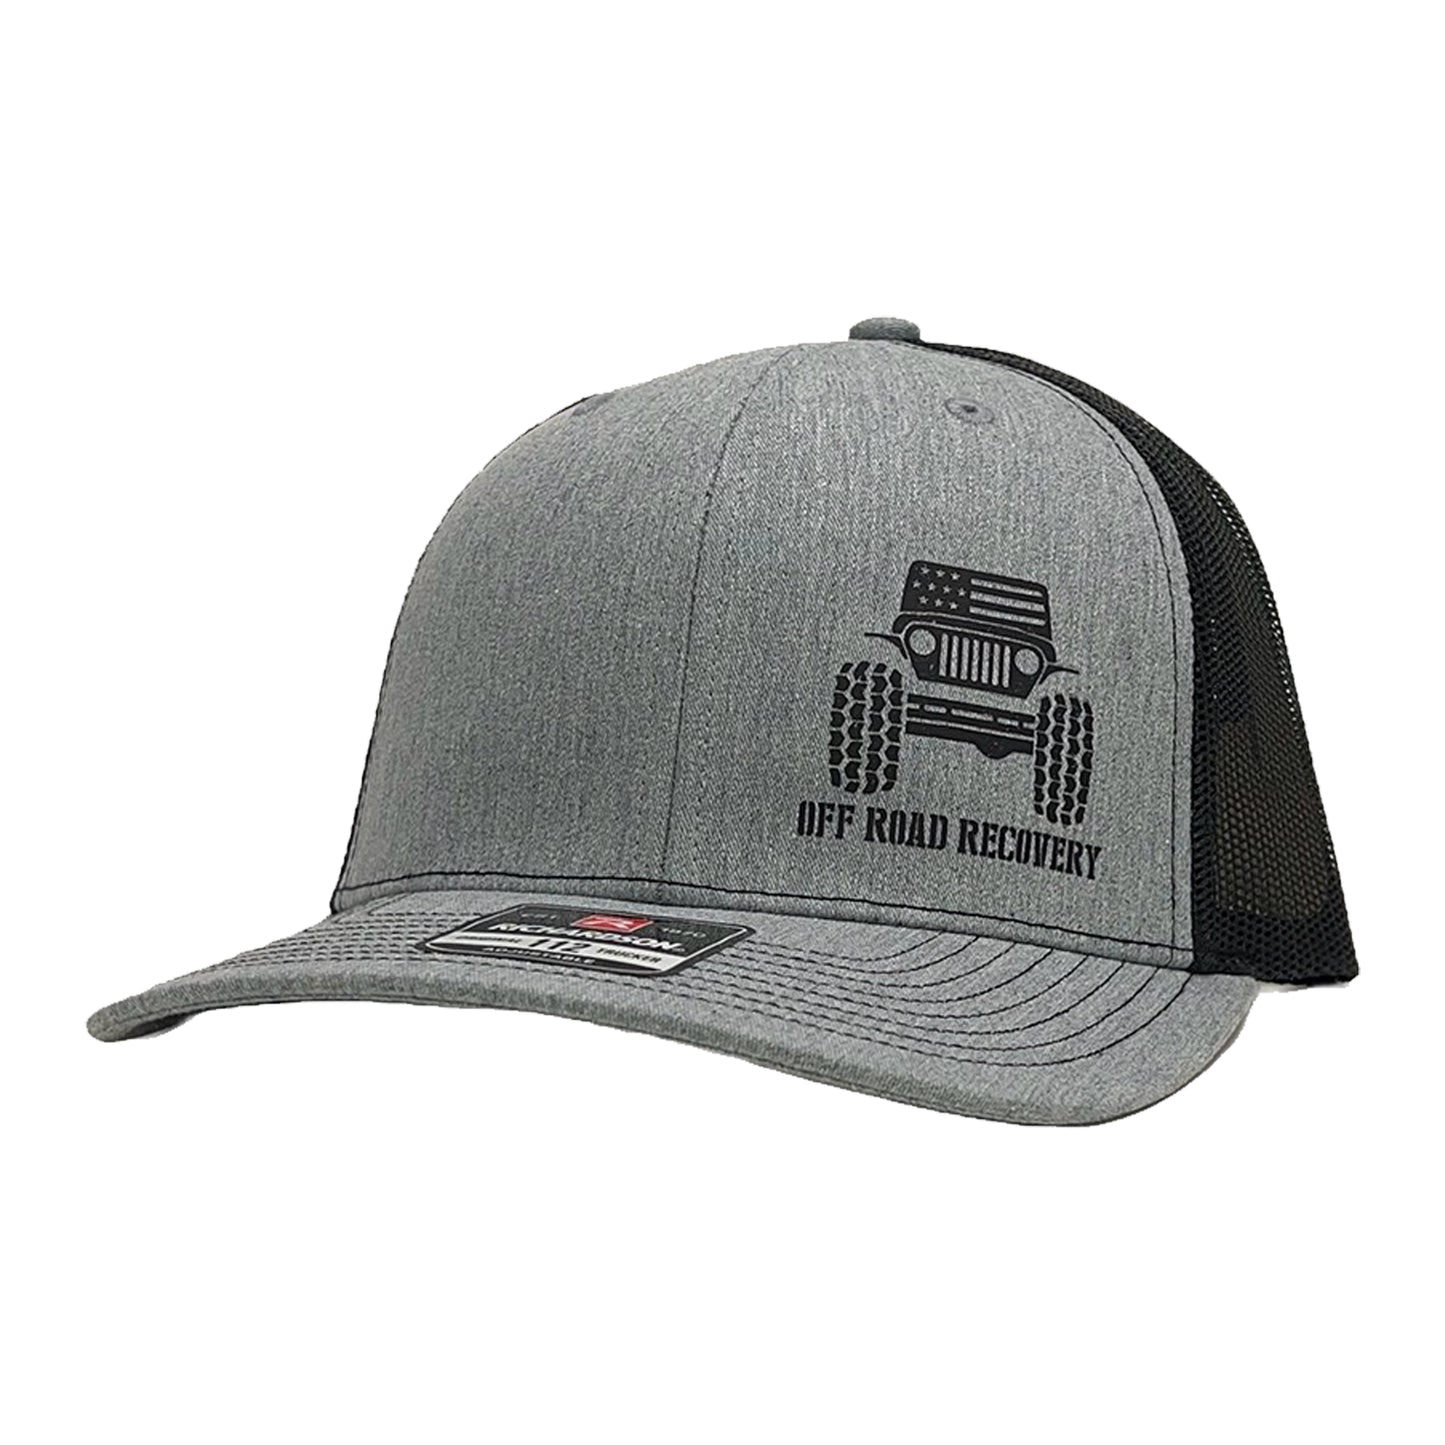 Off Road Recovery Cap, Richardson 112, Heather Gray / Black